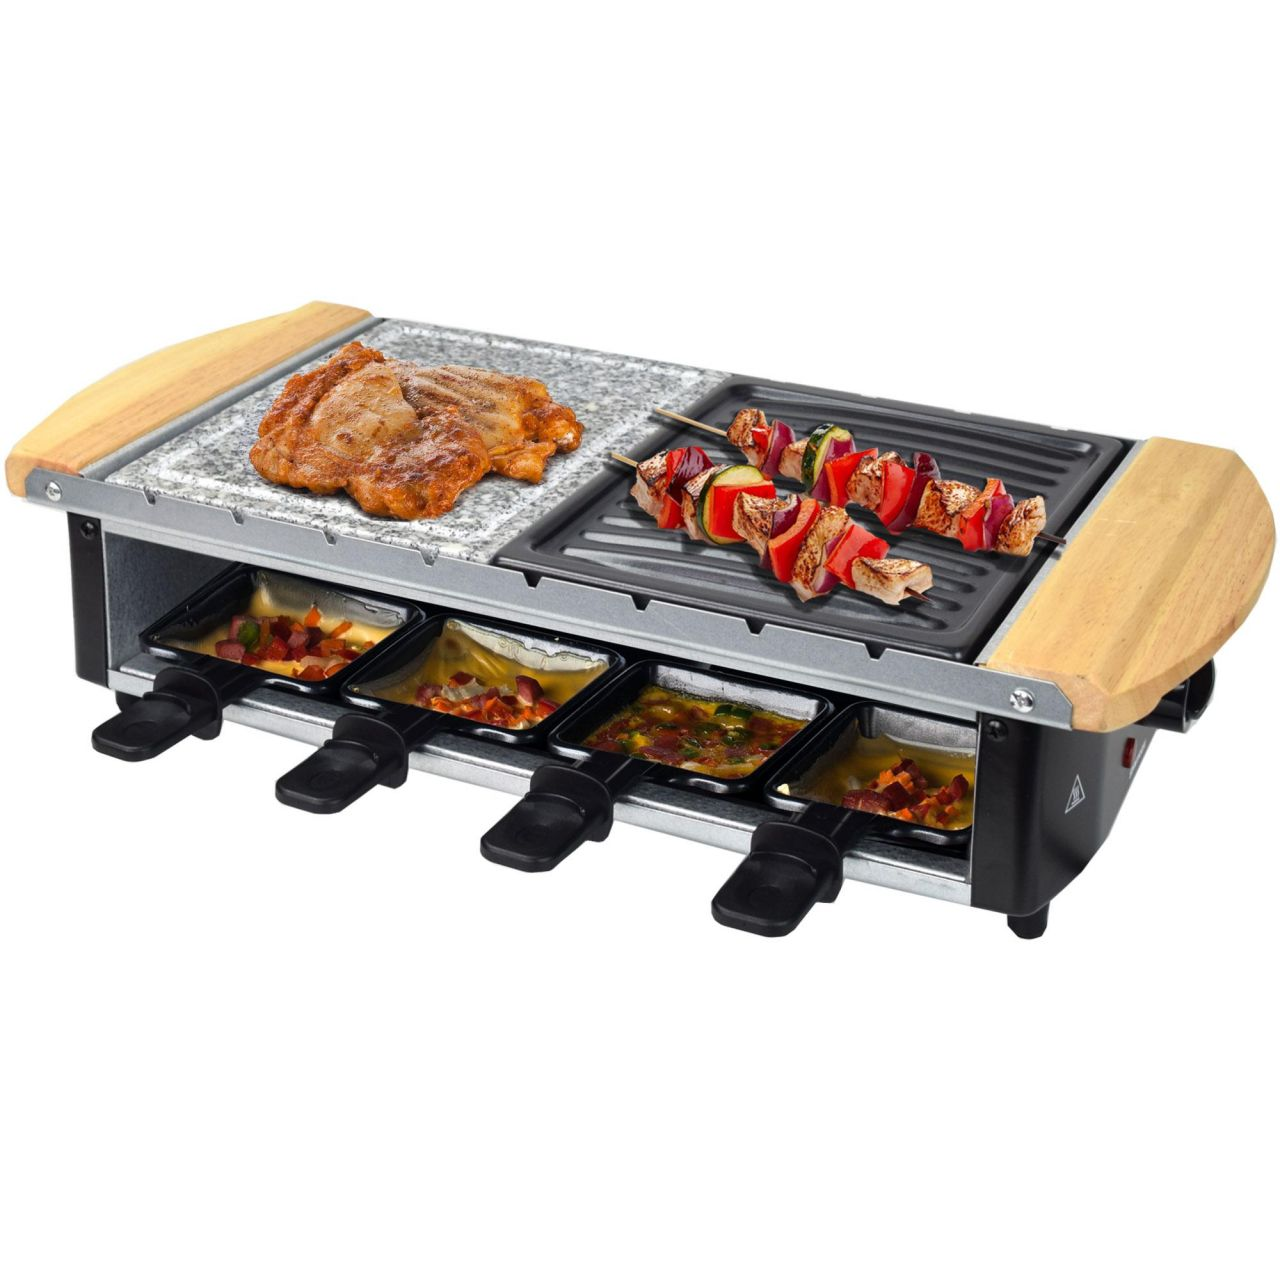 SYNTROX Raclette-Grill Raclette